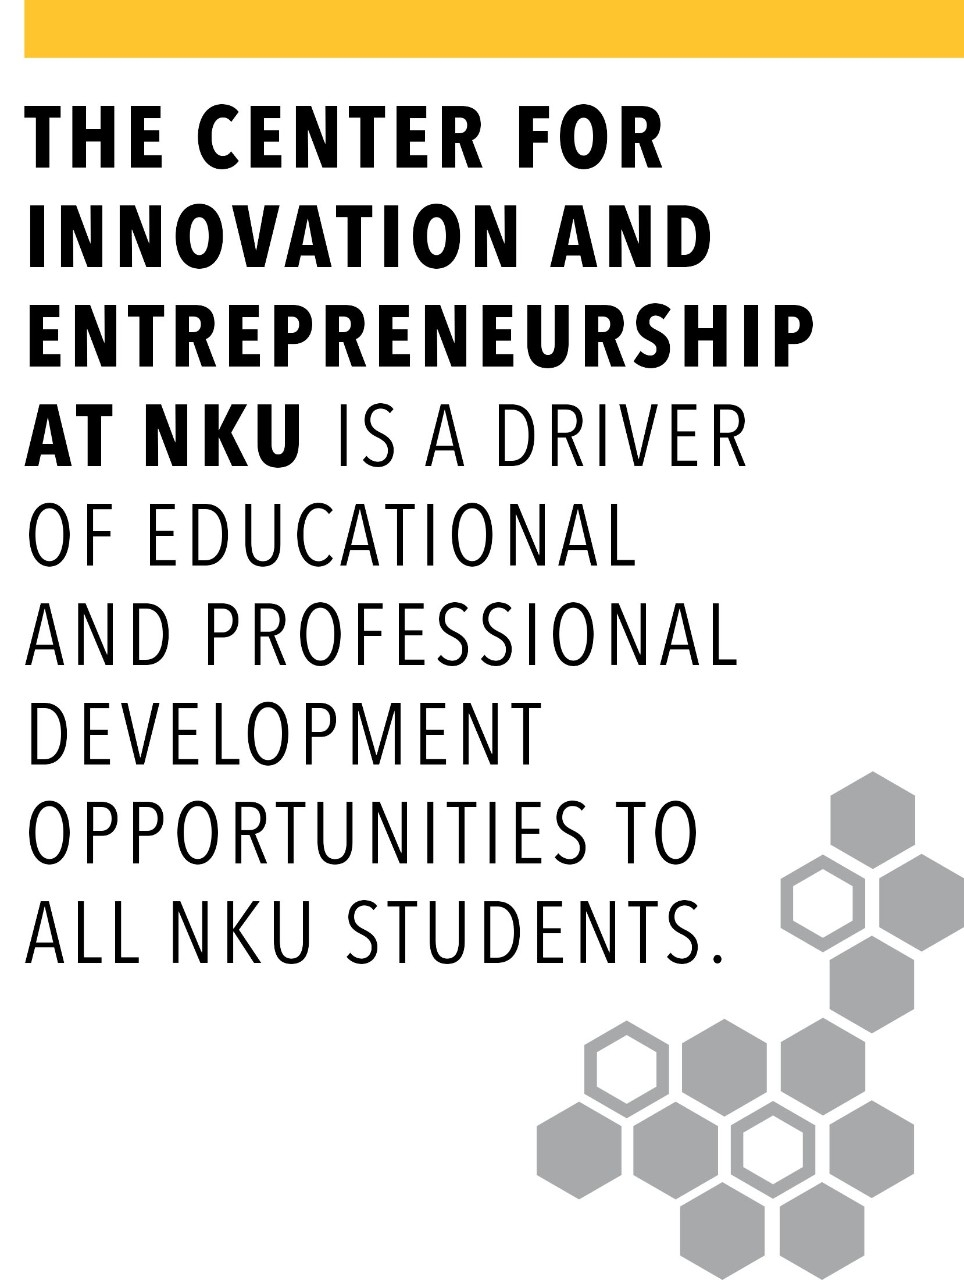 The Center for Innovation and Entrepreneurship at NKU is a driver of educational and professional development opportunities to all NKU students.